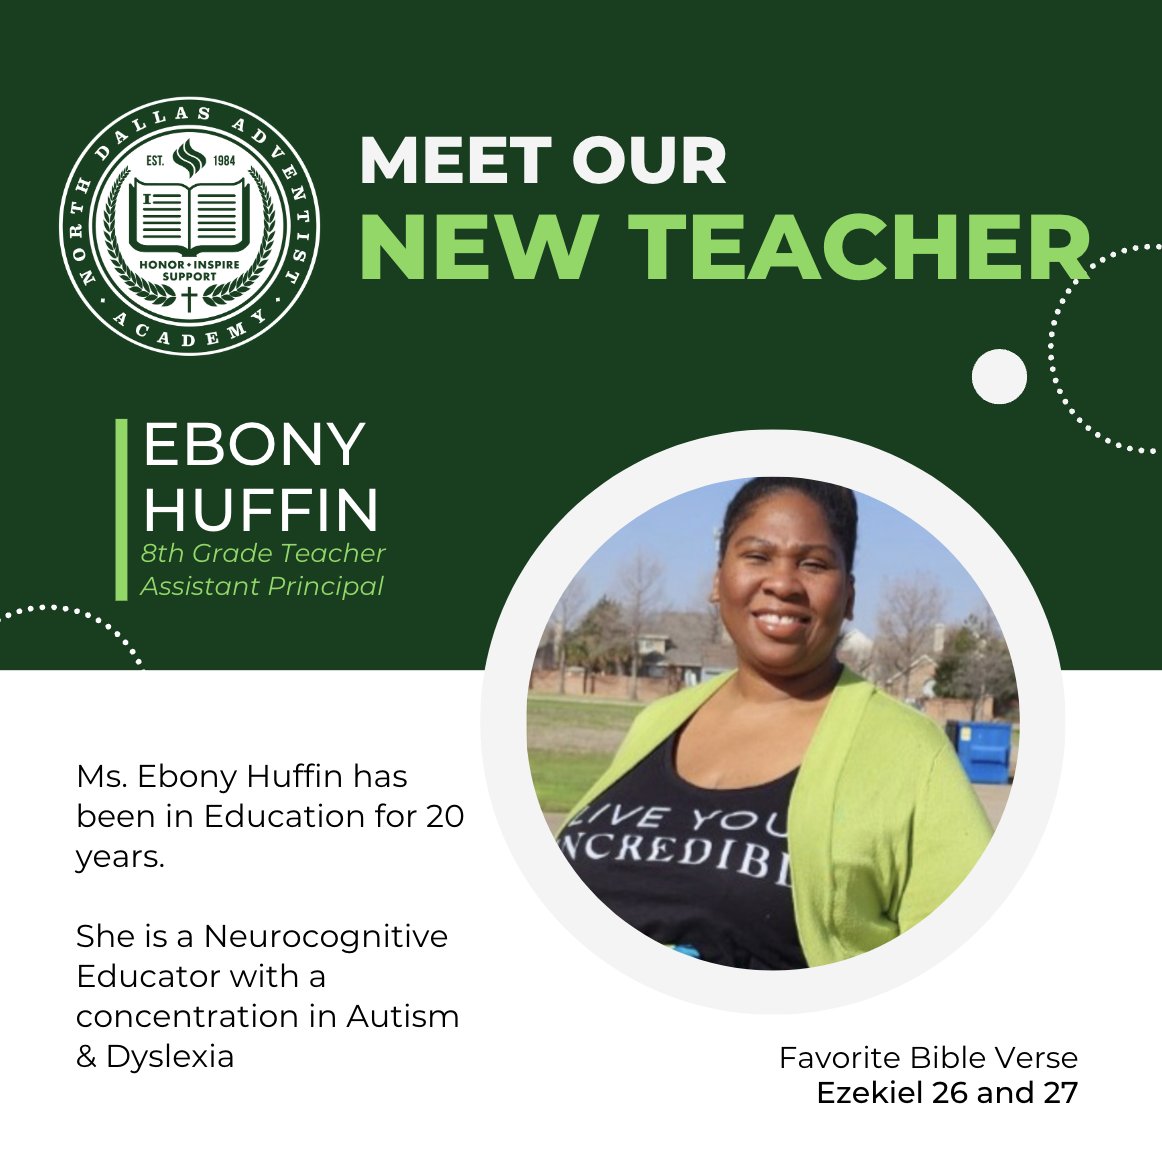 As part of our new staff introduction series, we proudly introduce Ms.  Ebony Huffin as our 8th-grade teacher and Lower School Assistant Principal. #adventisteducation